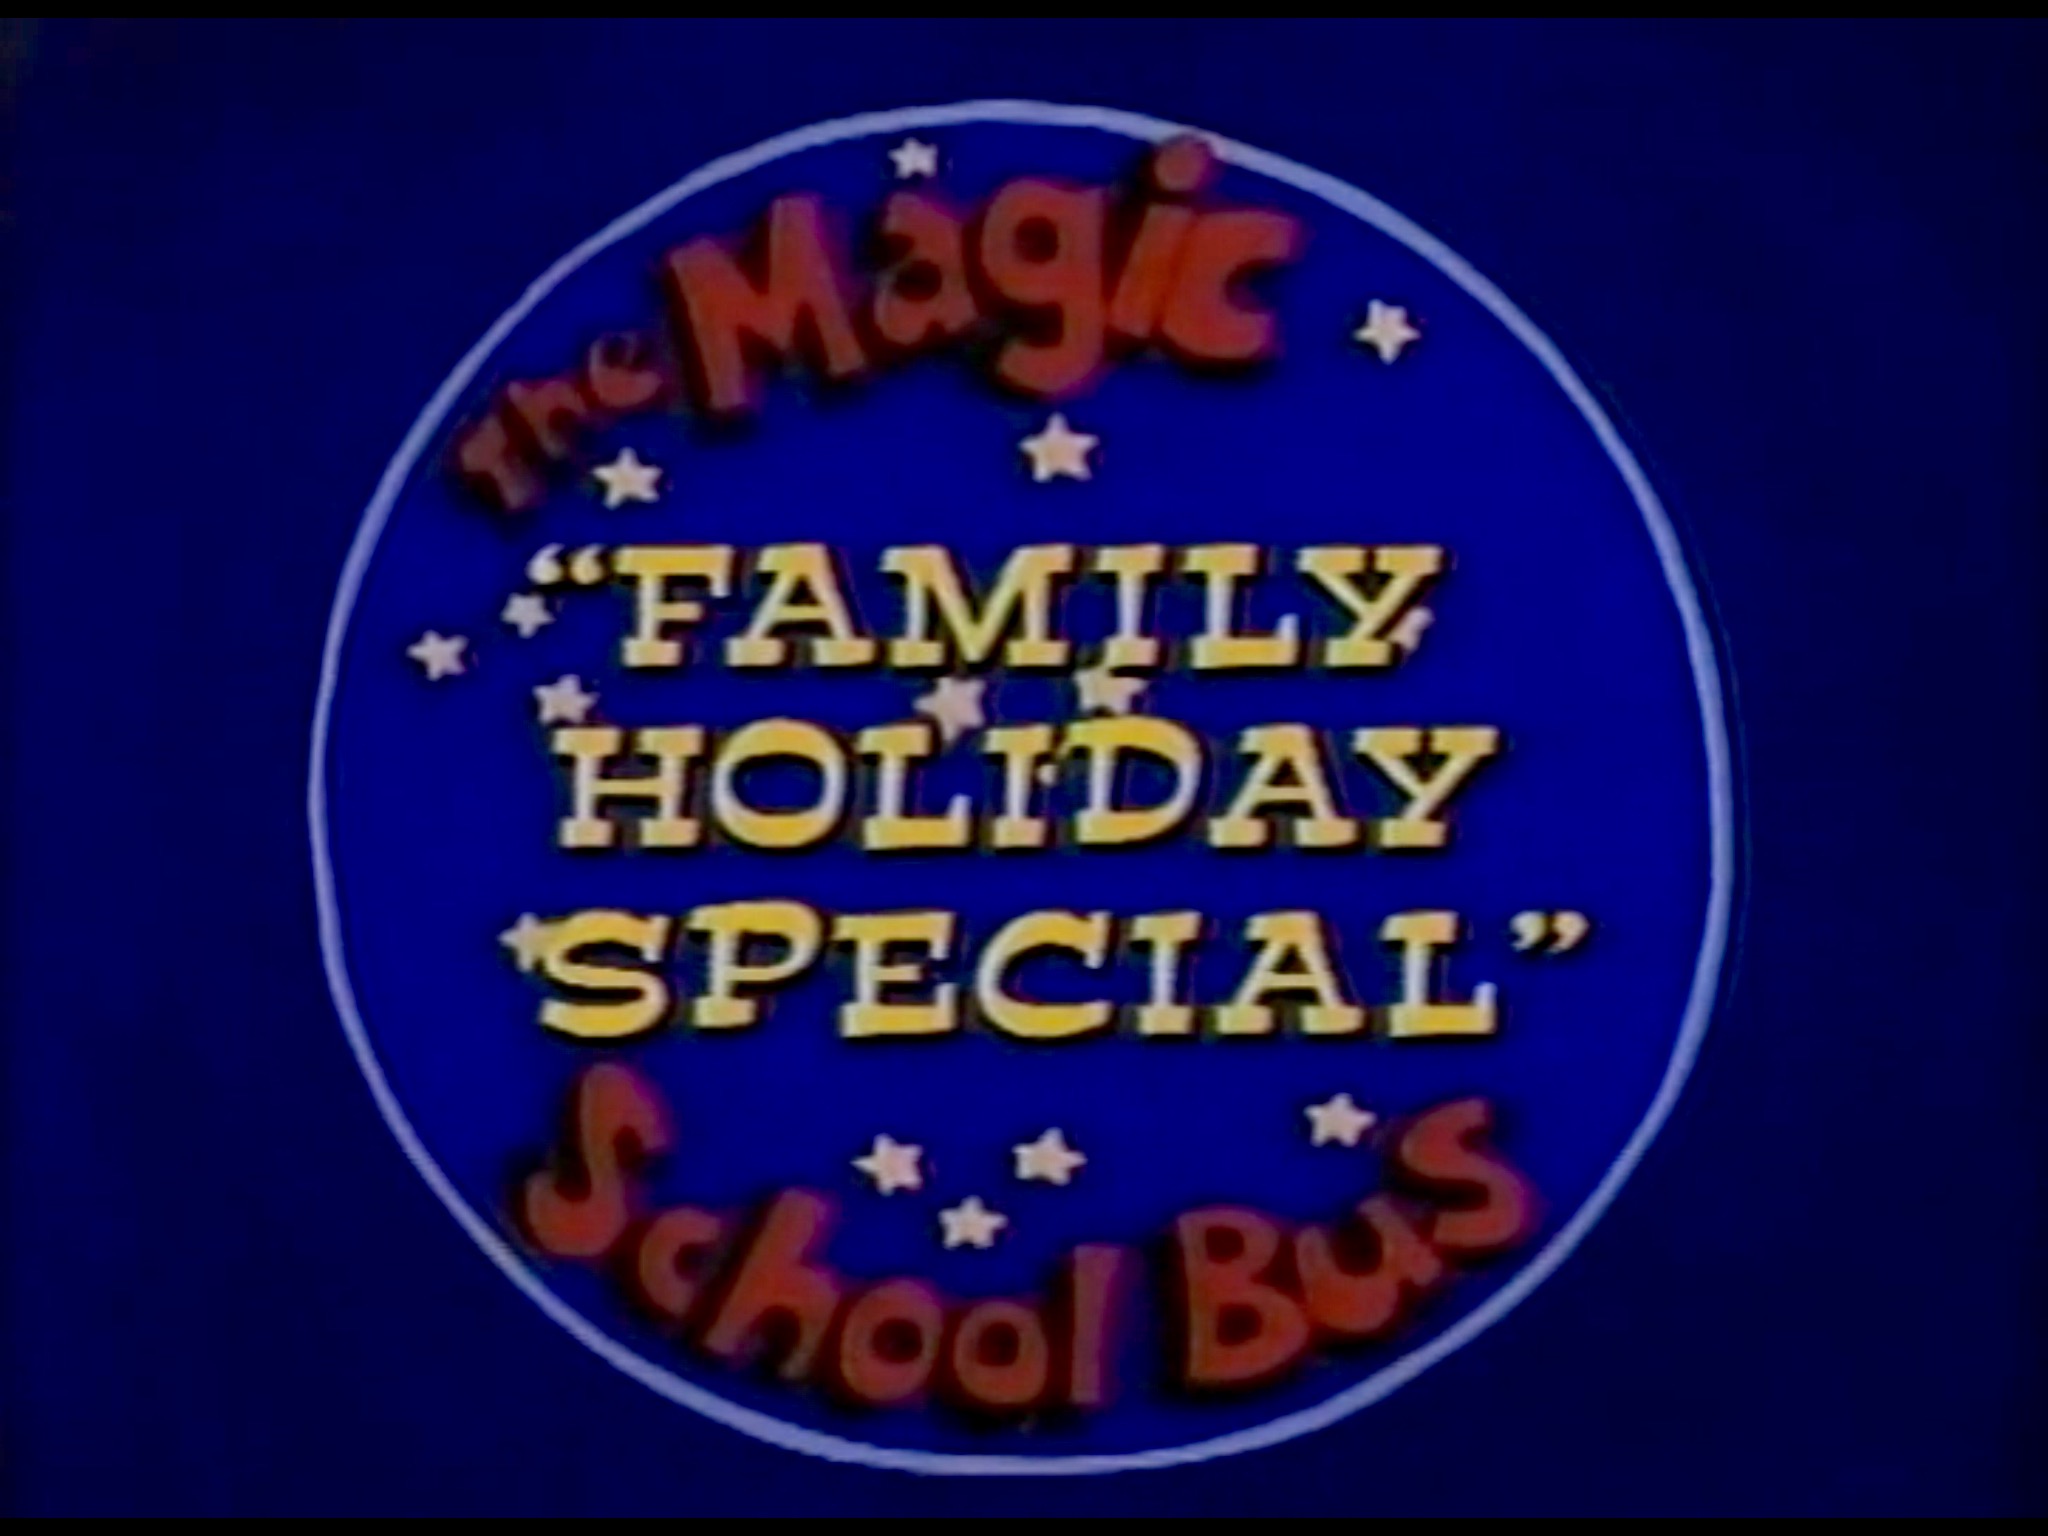 Magic school bus holiday special title.jpg